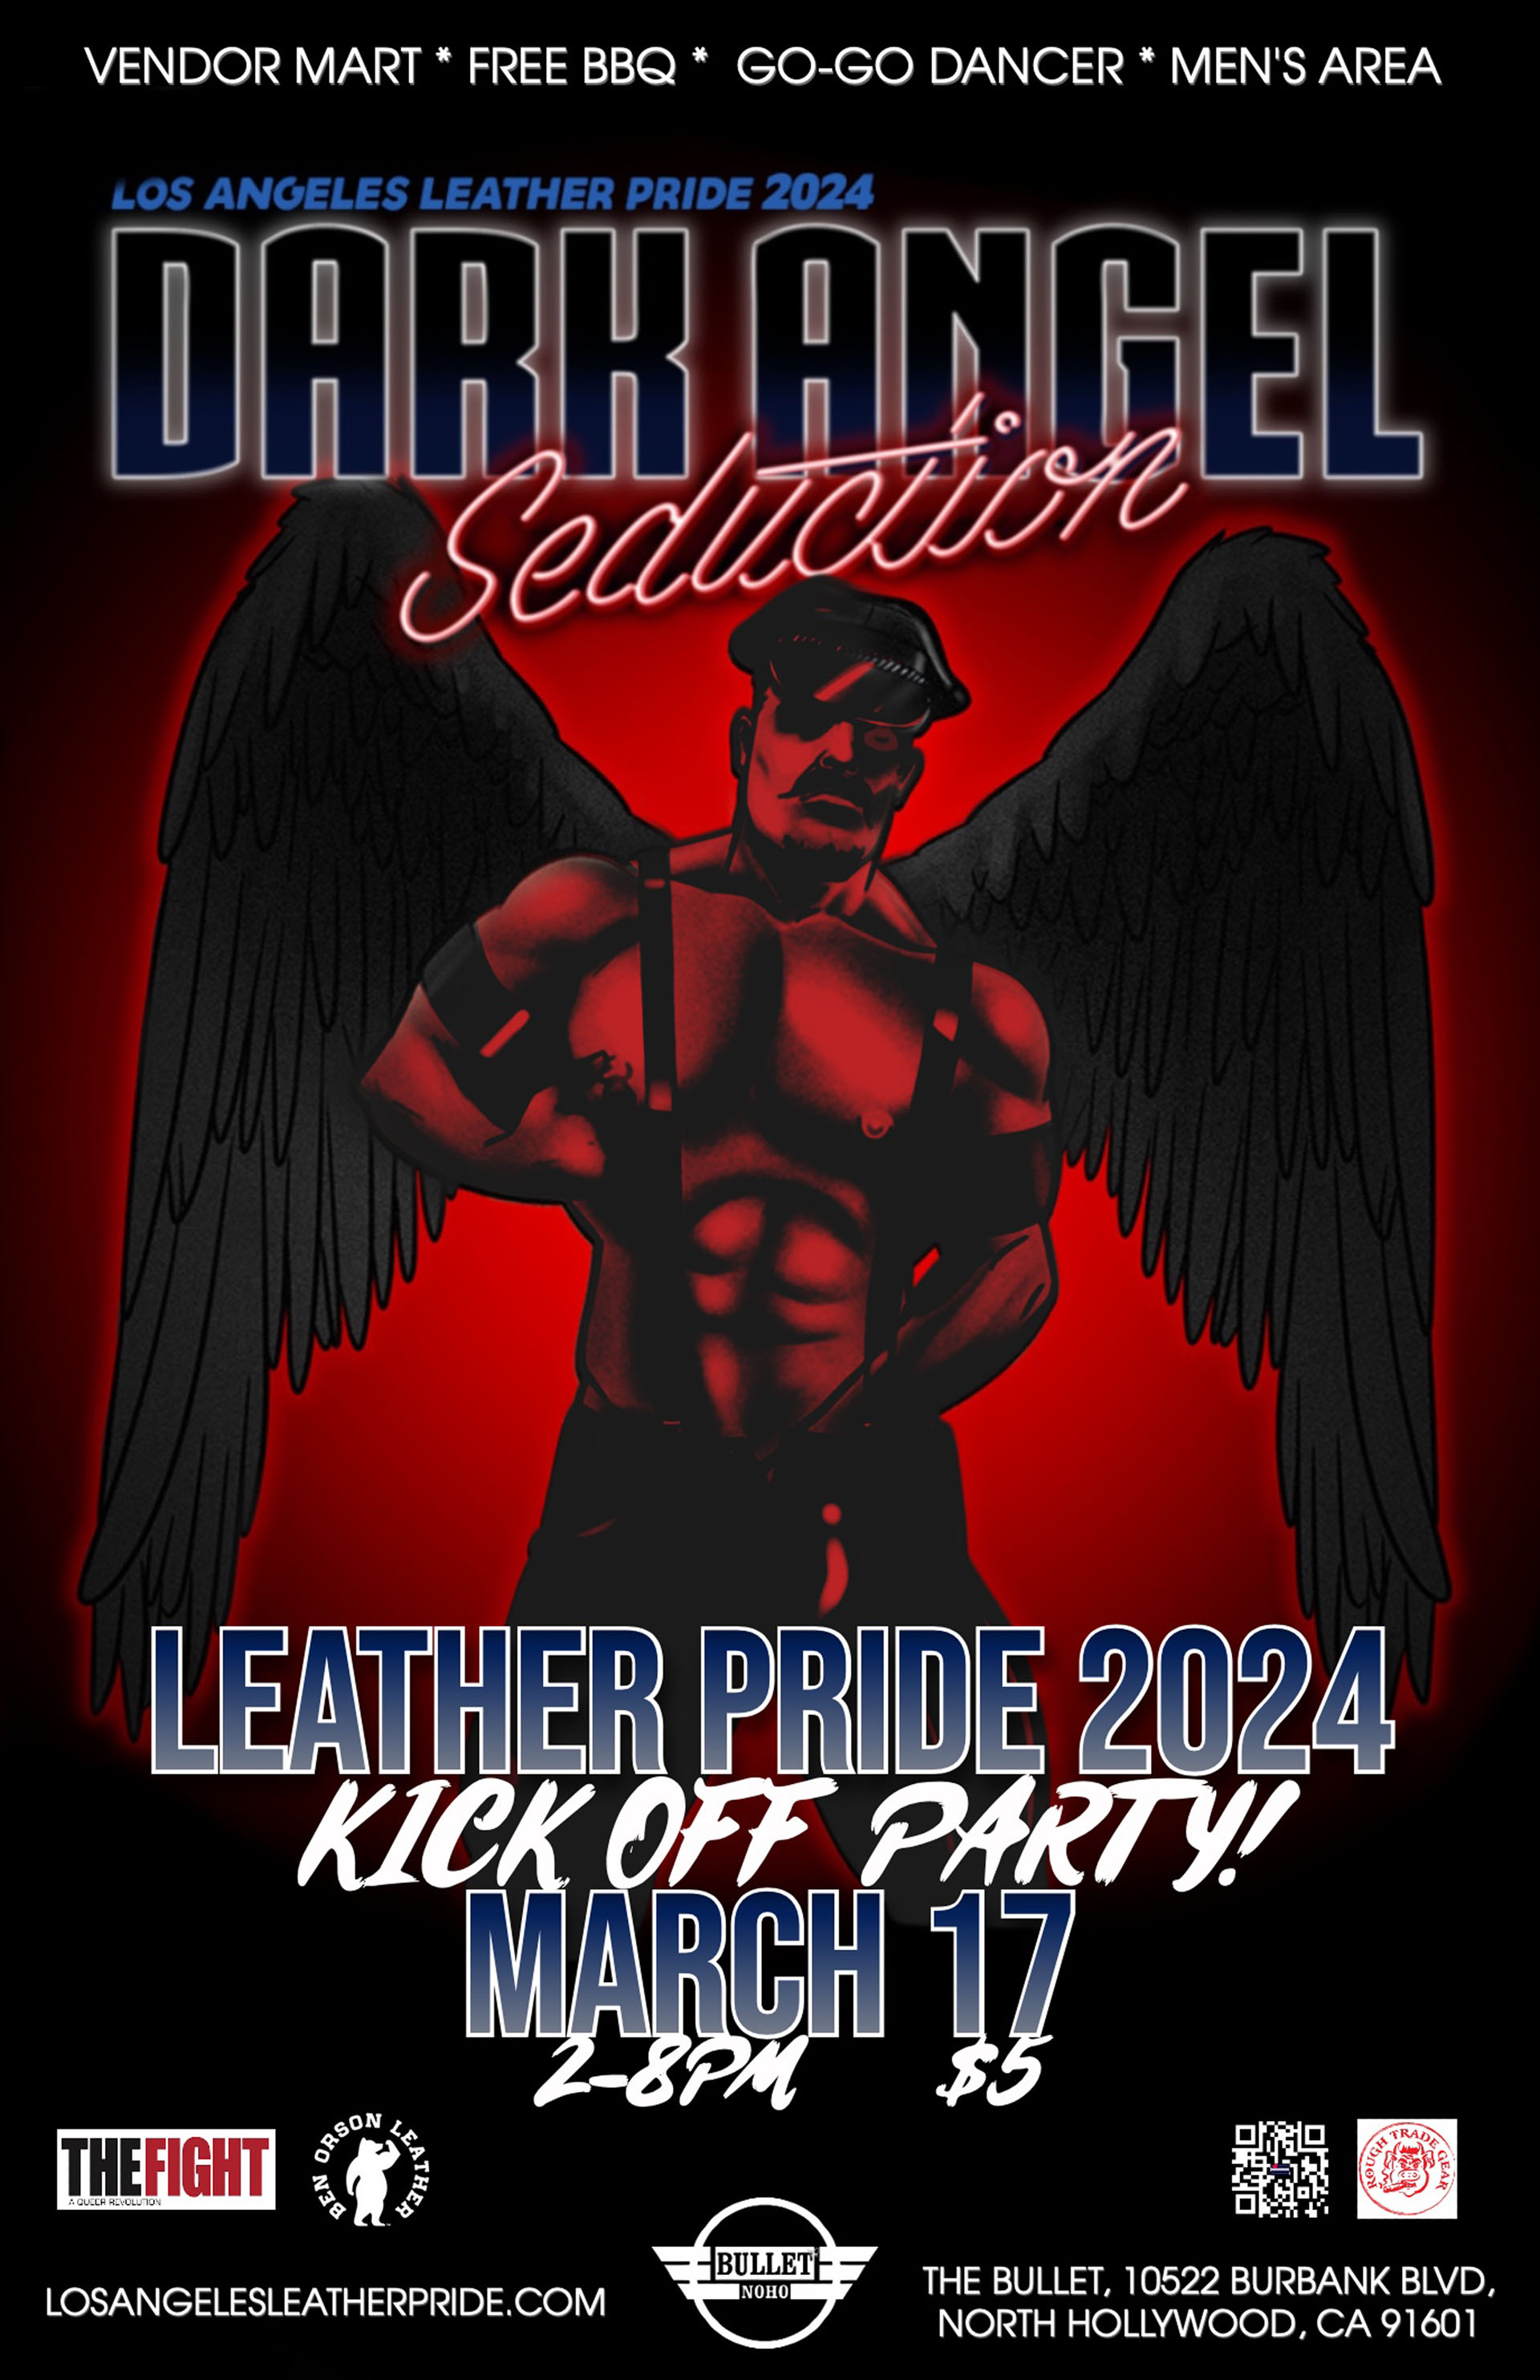 THE BULLET BAR and LOS ANGELES LEATHER PRIDE 2024 Present: LEATHER PRIDE 2024 KICK OFF PARTY! Sunday, 03/17/24 from 2:00 PM to 8:00 PM. $5 cover.